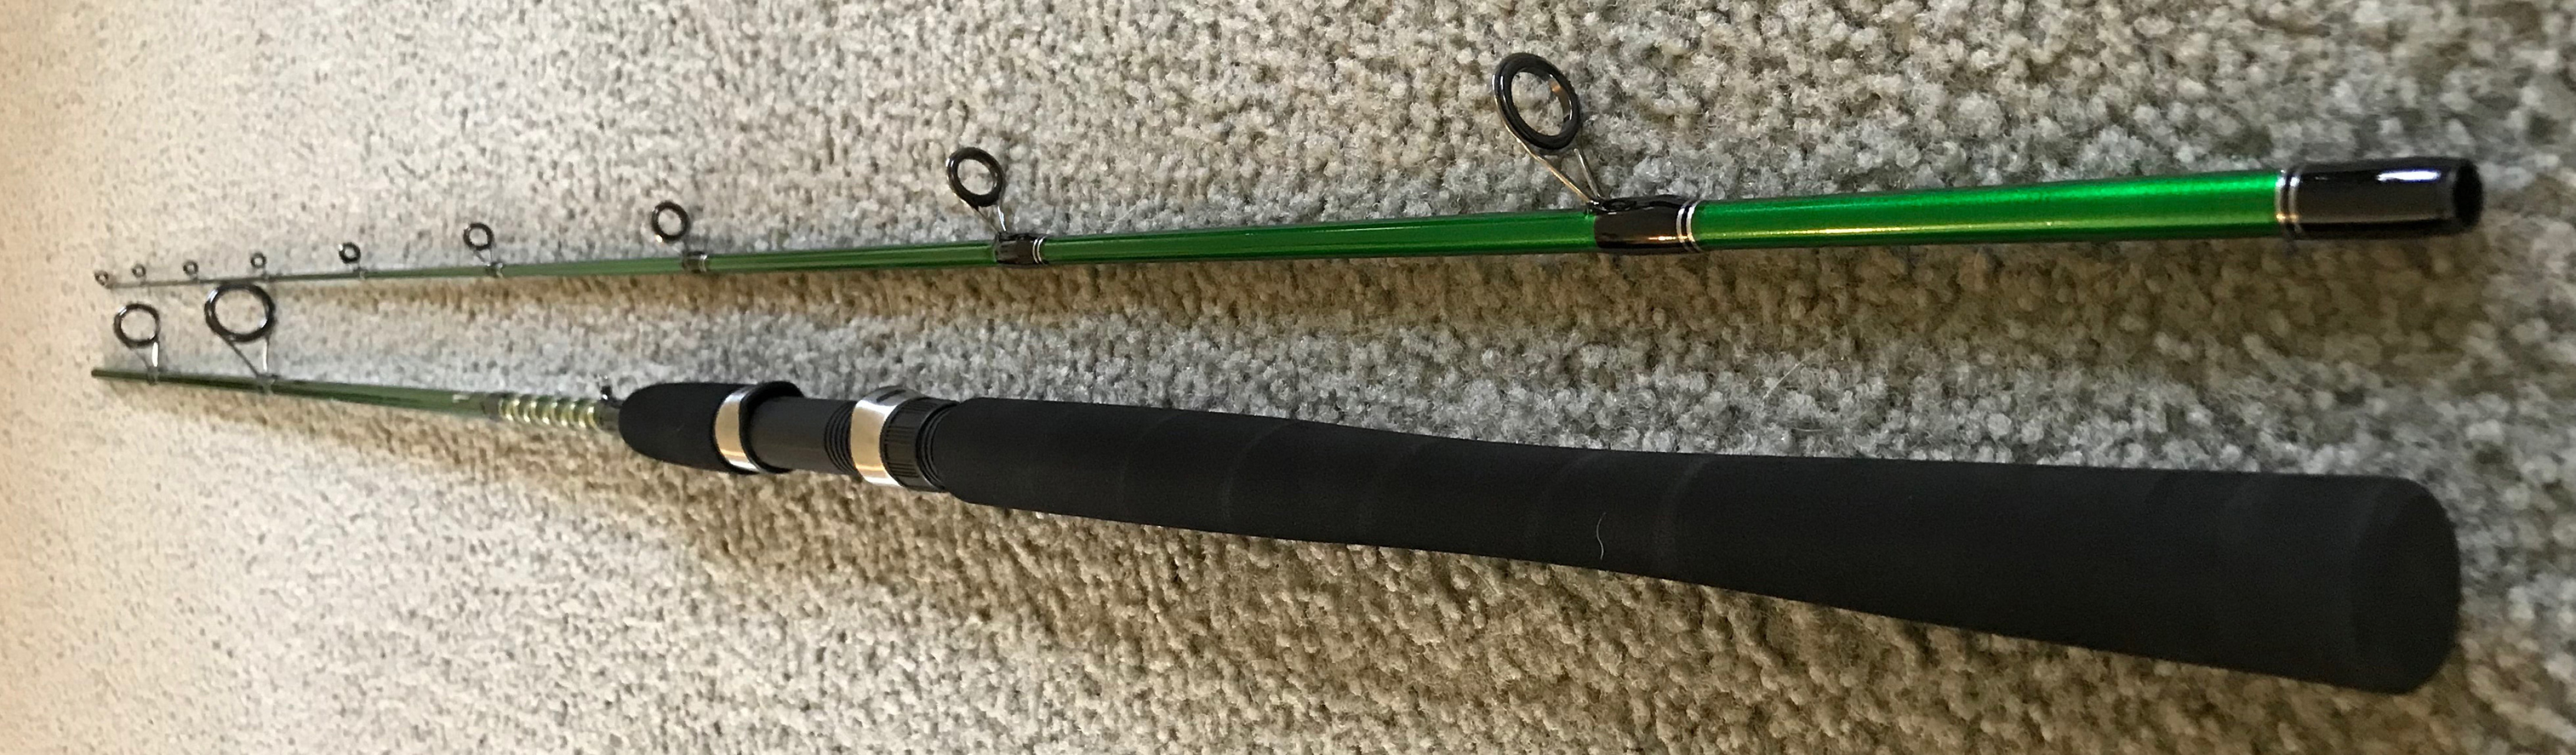 Salmon Fishing Rods For Sale - Salmon Chronicles